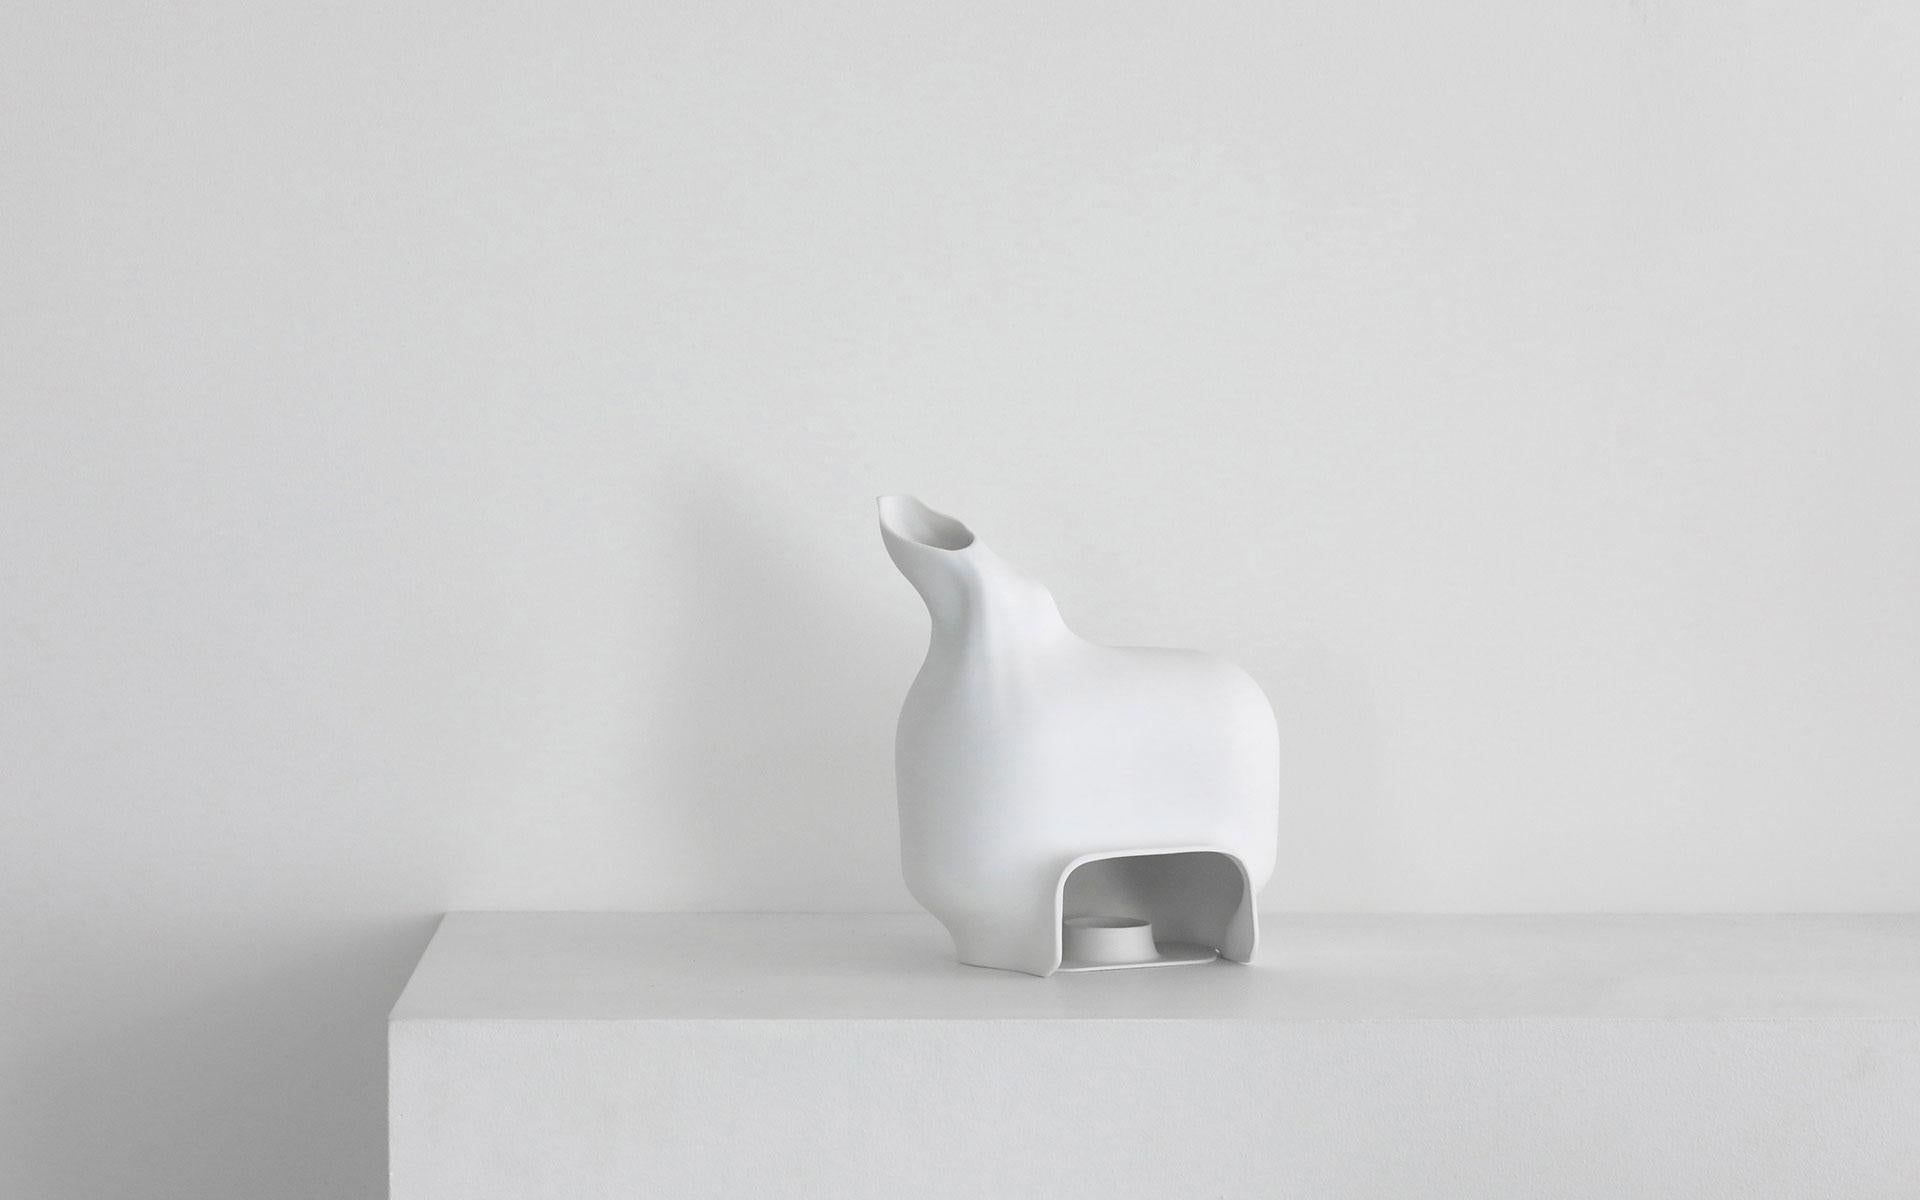 betweenShadows M Horizontal is a candle-holder in Limoges Porcelain Bisque.
This piece has two sizes (S and M) in horizontal or vertical versions each, everything sold individually. 

These candle holders are alcoves for dreaming. Covered in a